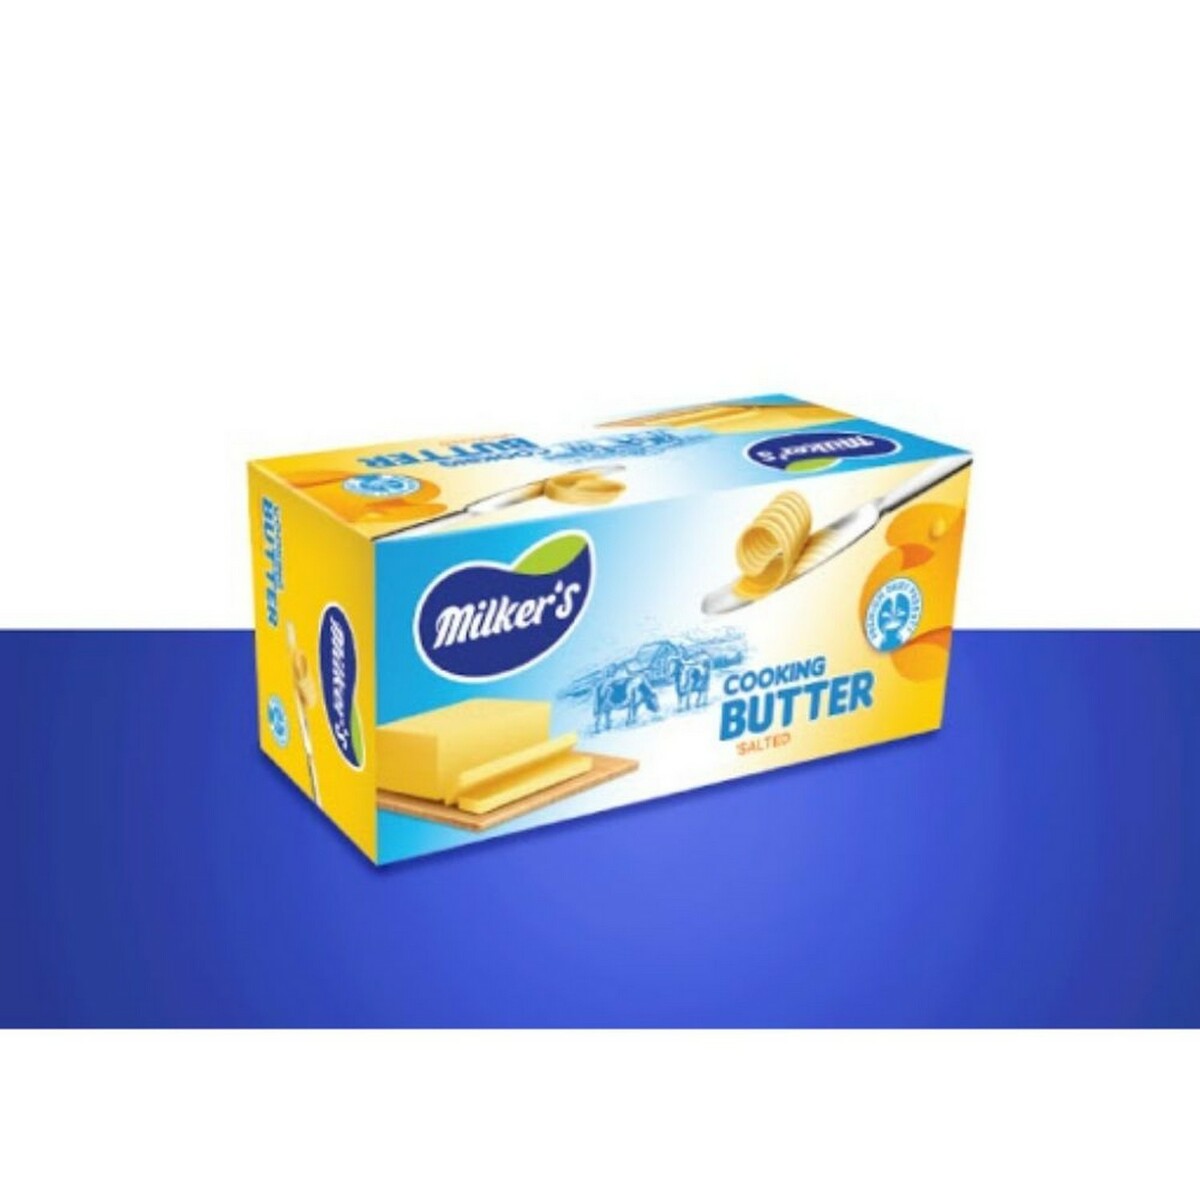 Milkers Salted Butter 500g